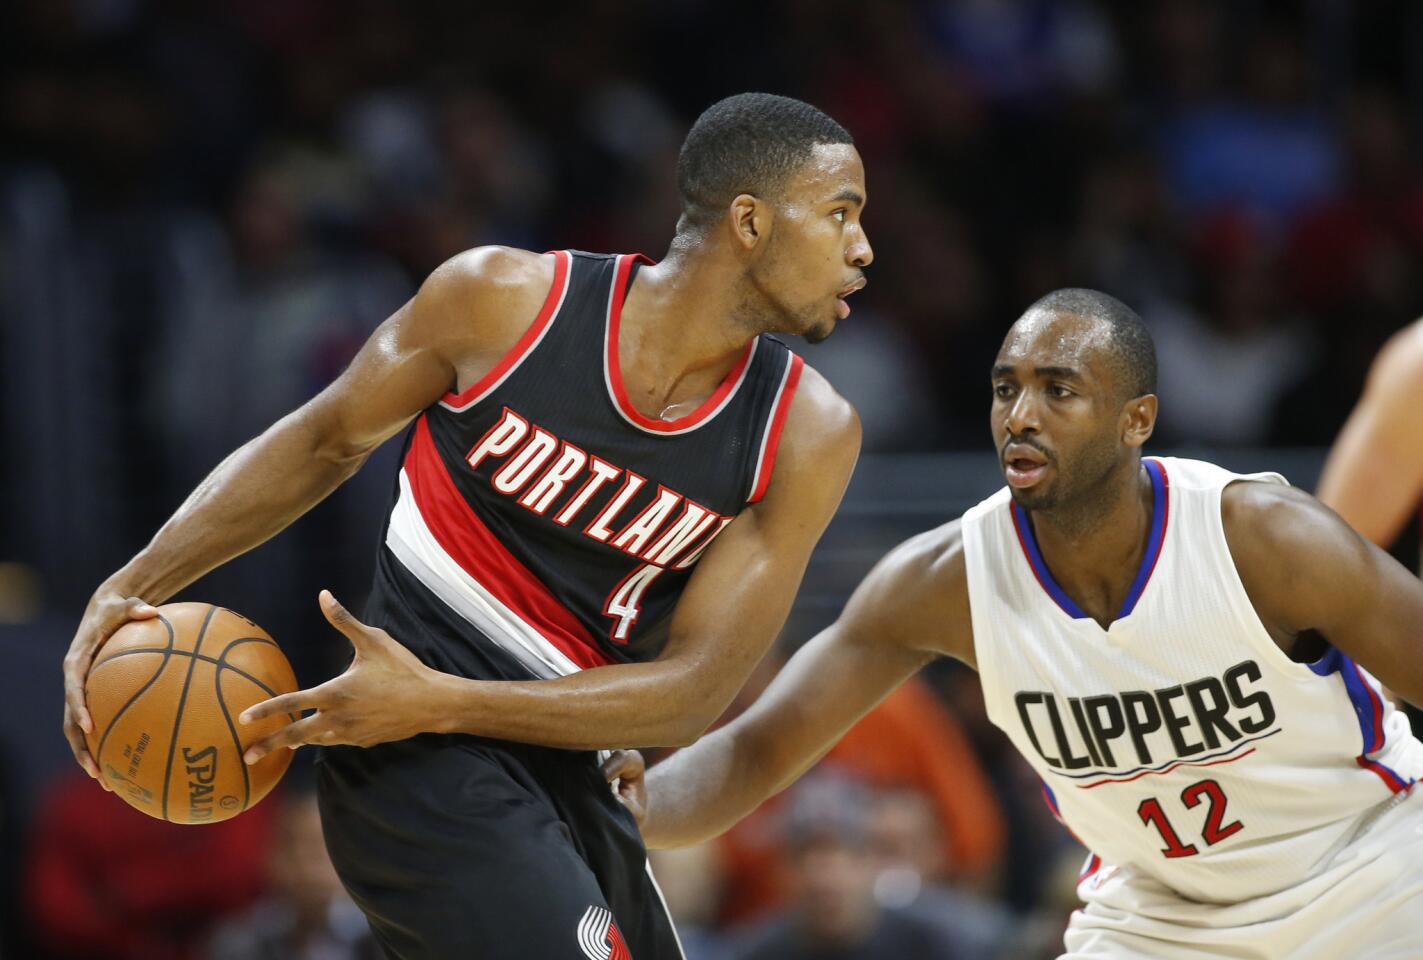 Maurice Harkless, Luc Richard Mbah a Moute